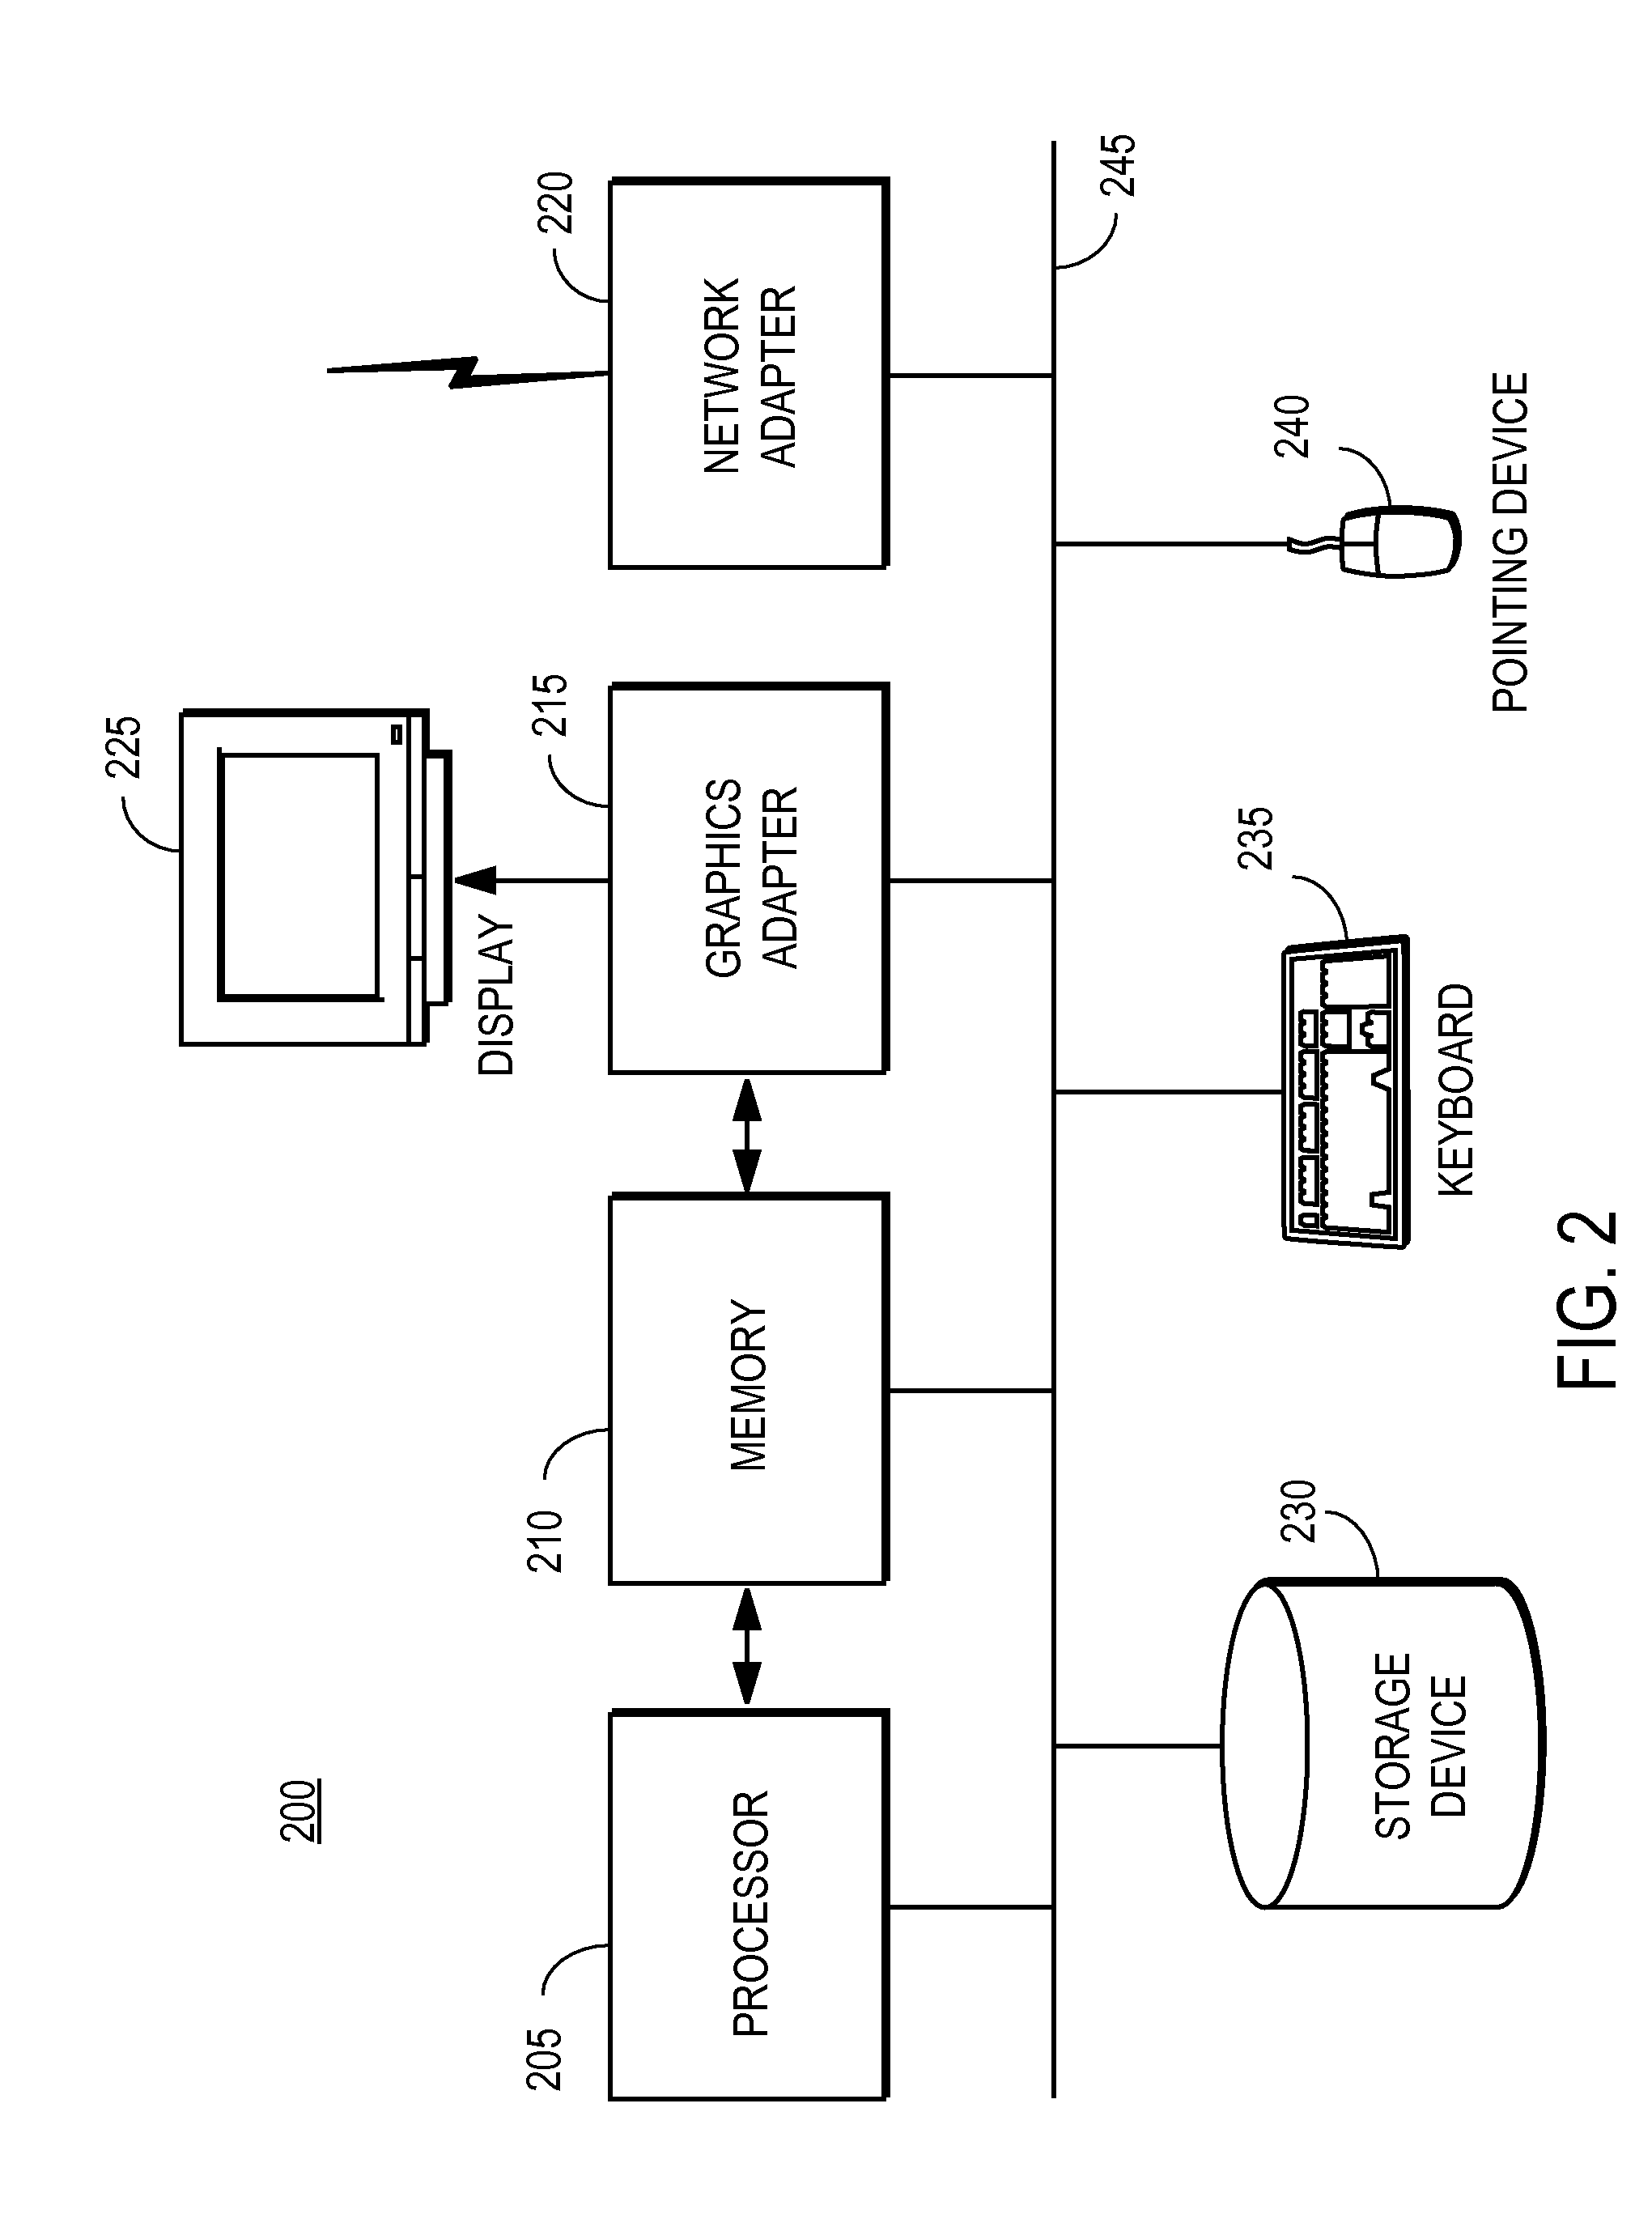 System and method for an integrated enterprise search